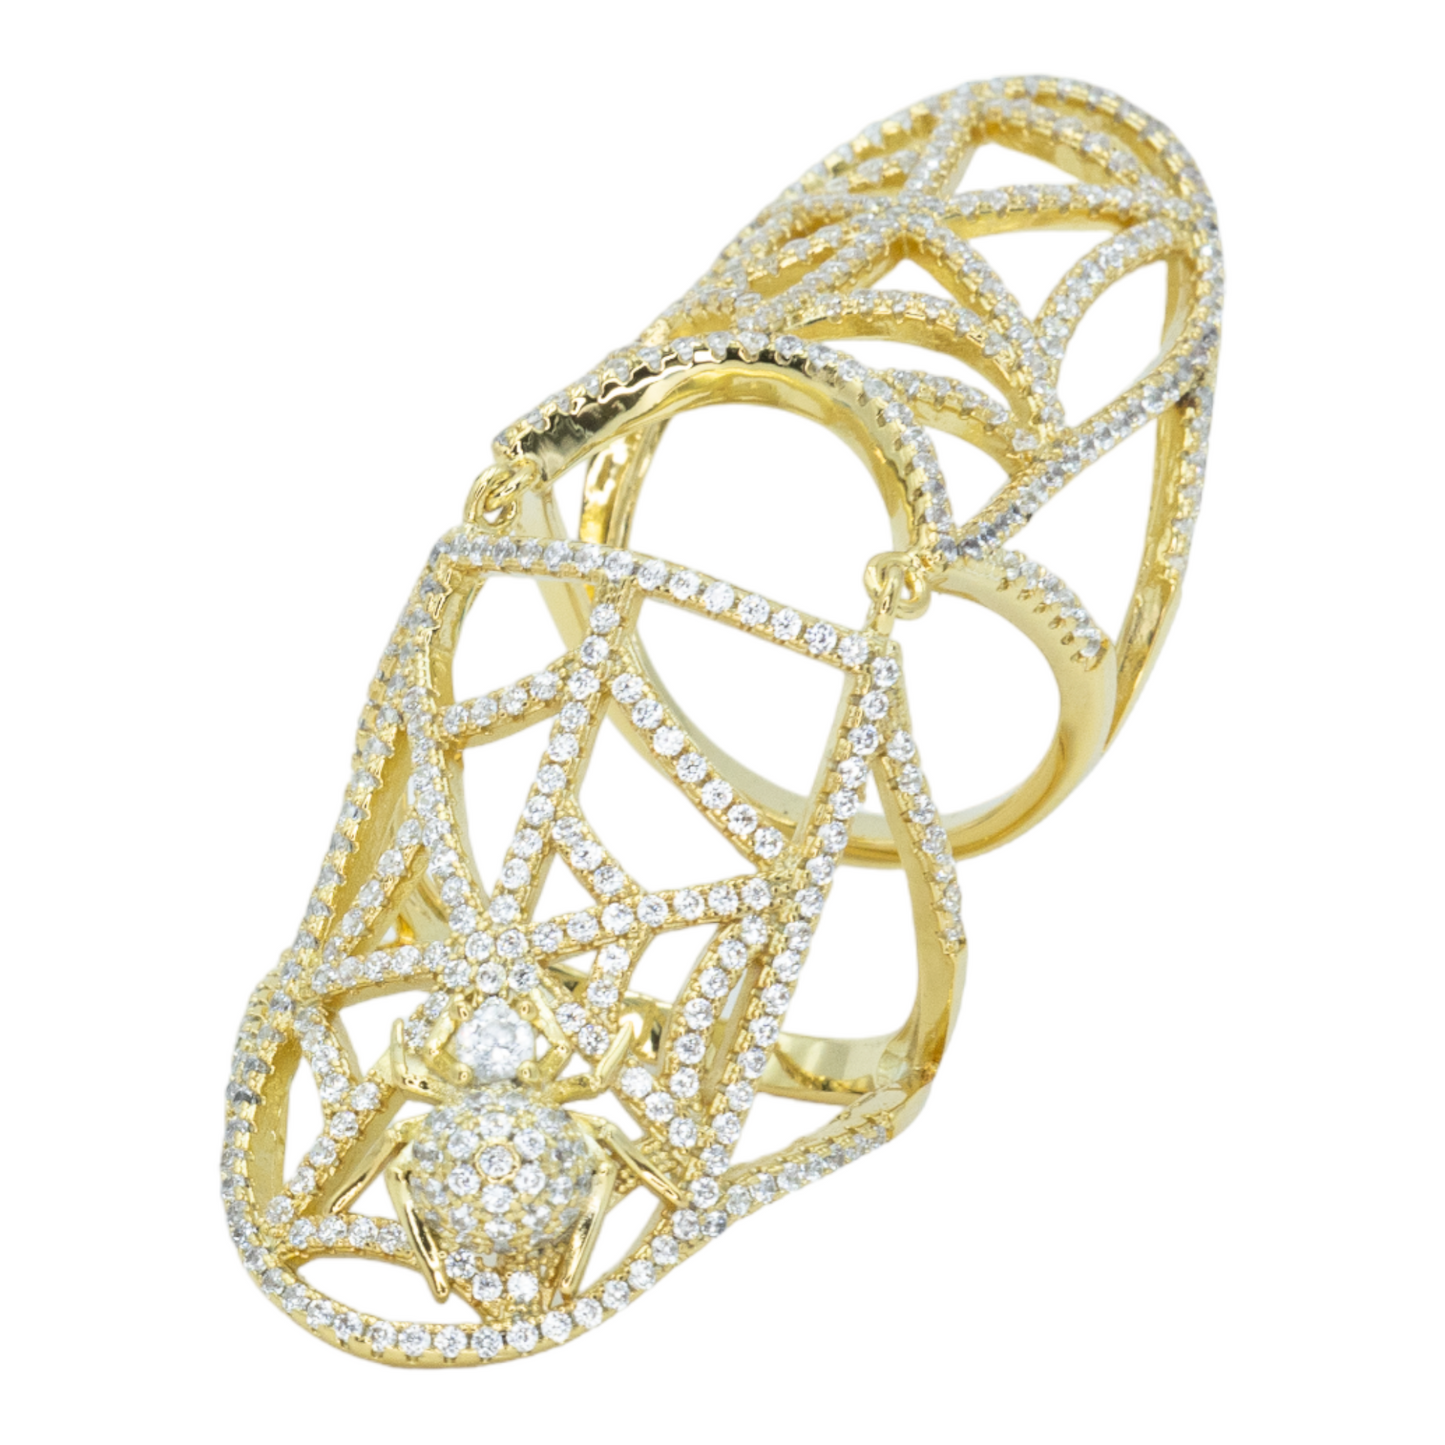 Full finger spider web pave ring w/ 3A CZ stones rhodium G plated